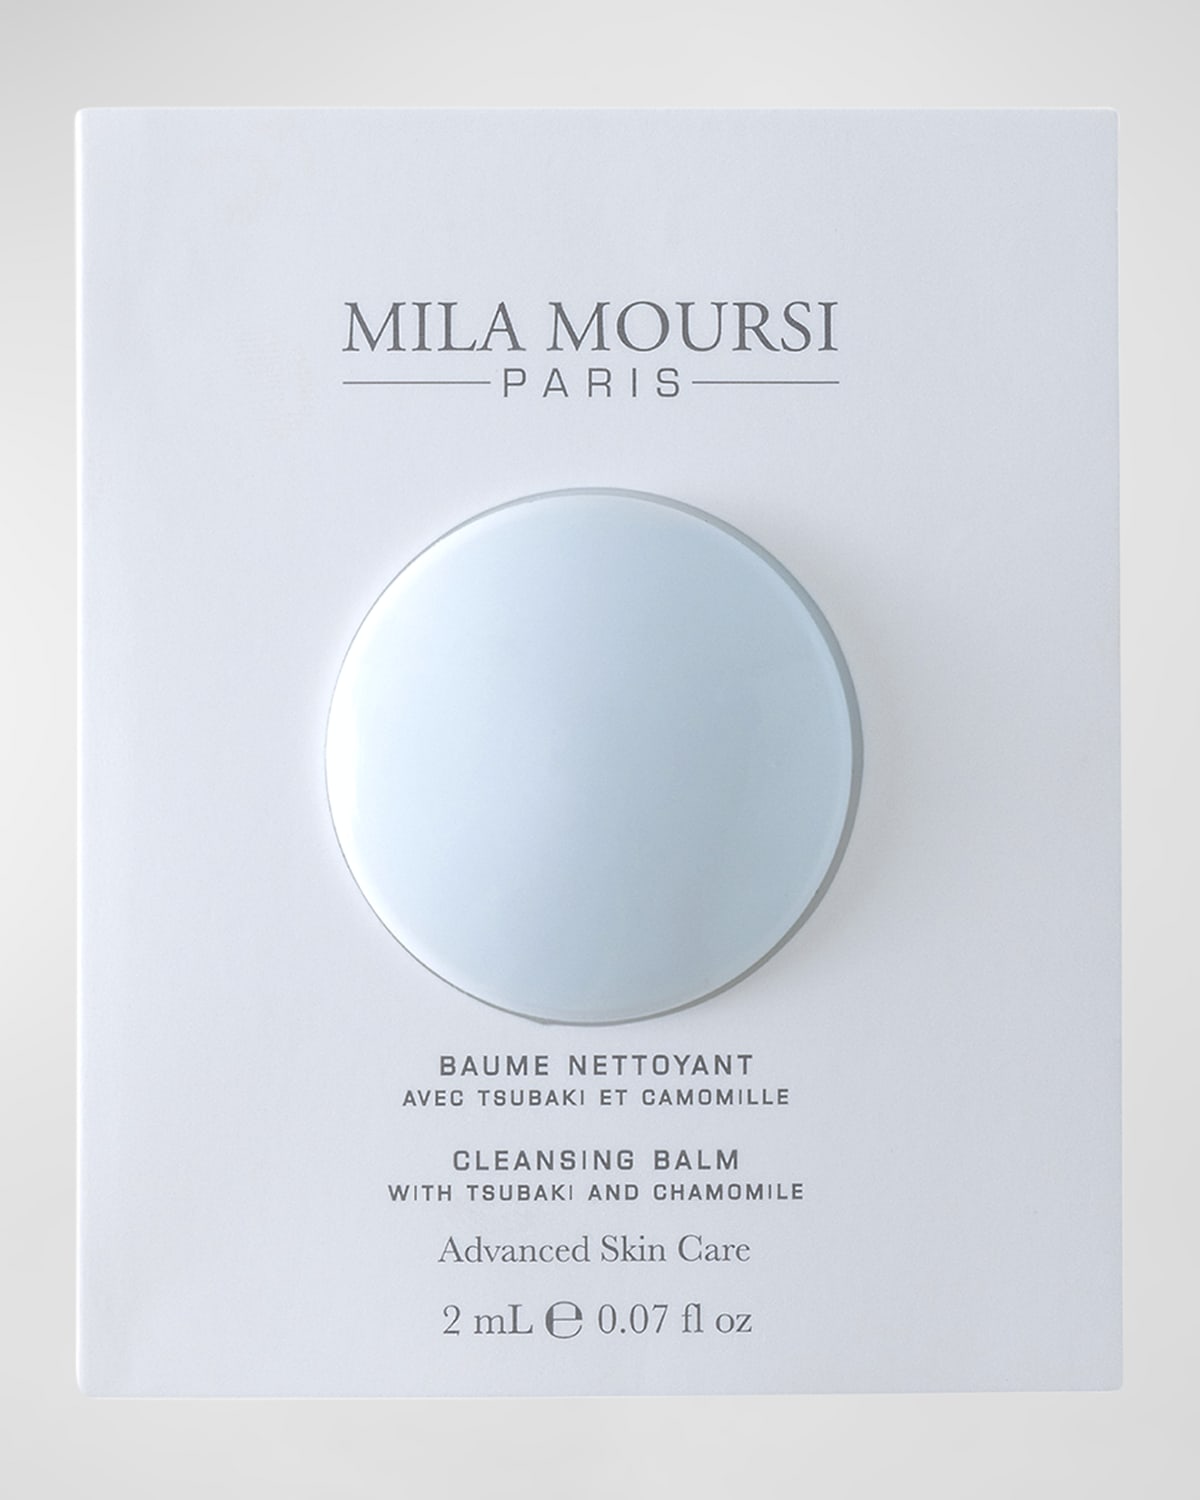 Cleansing Balm, 0.07 oz. - Yours with any $75 Mila Moursi Purchase